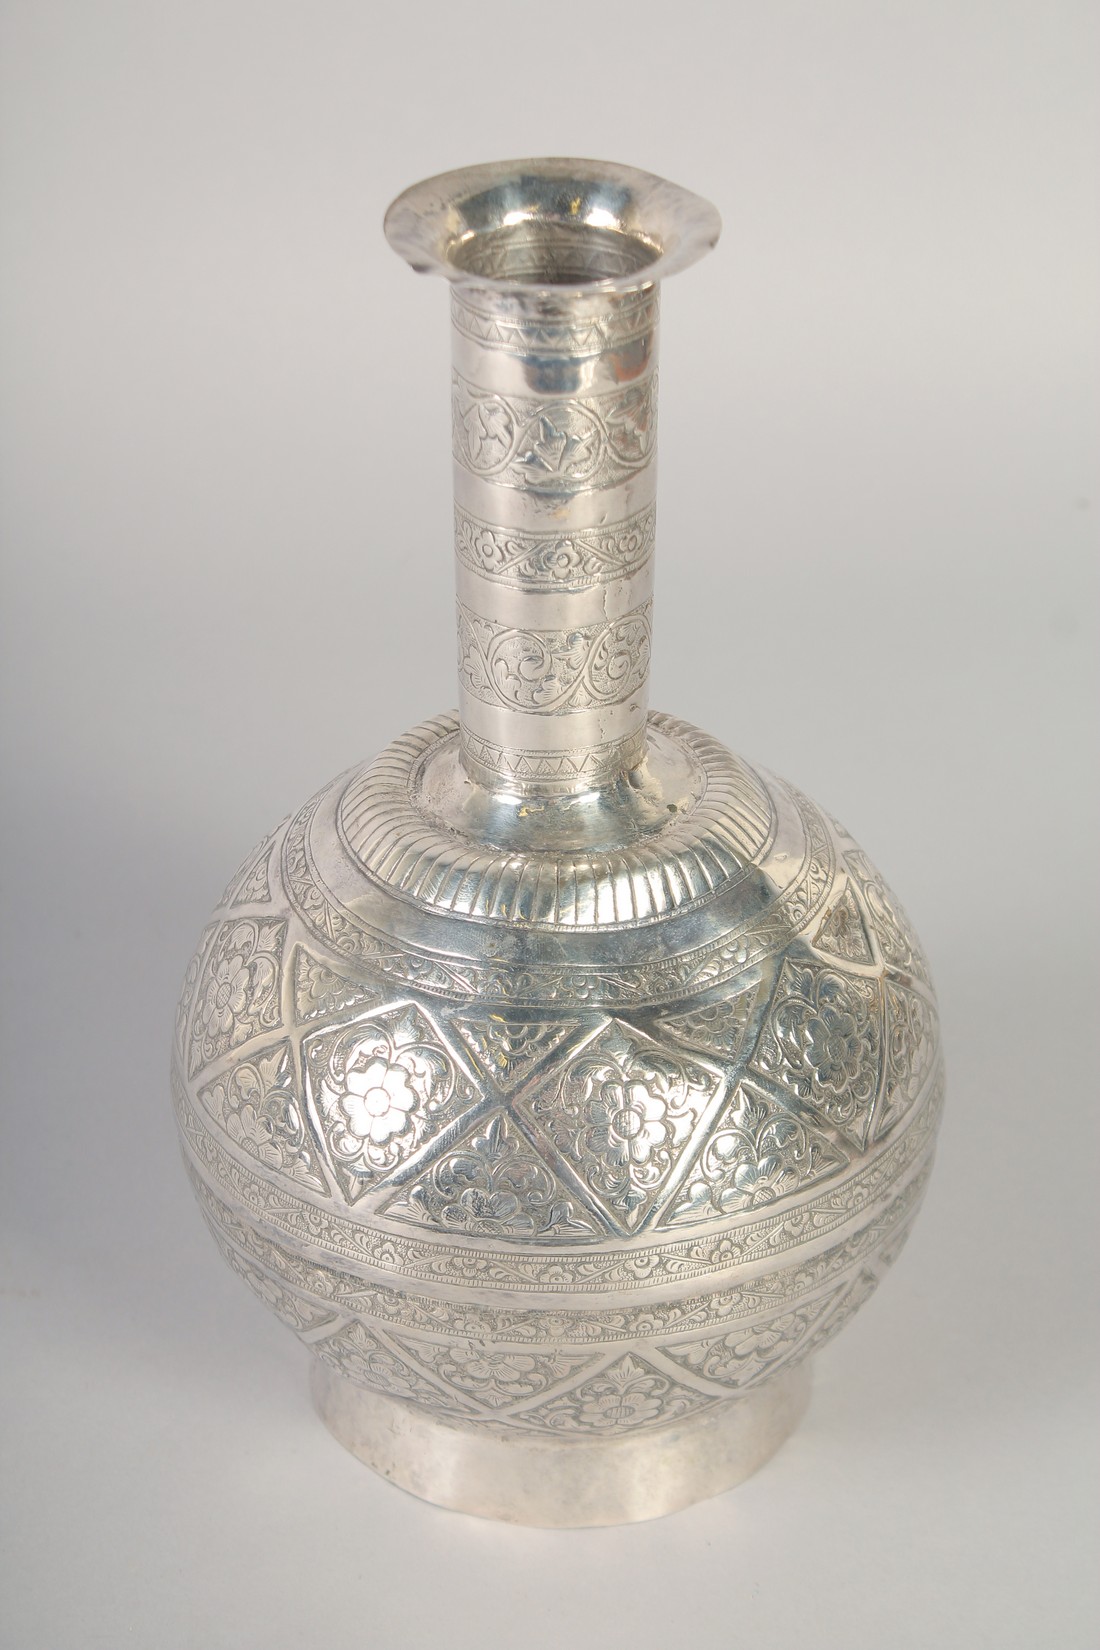 A FINELY ENGRAVED INDIAN OR SOUTH EAST ASIAN WHITE METAL SURAHI BOTTLE, 23cm high. - Image 2 of 5